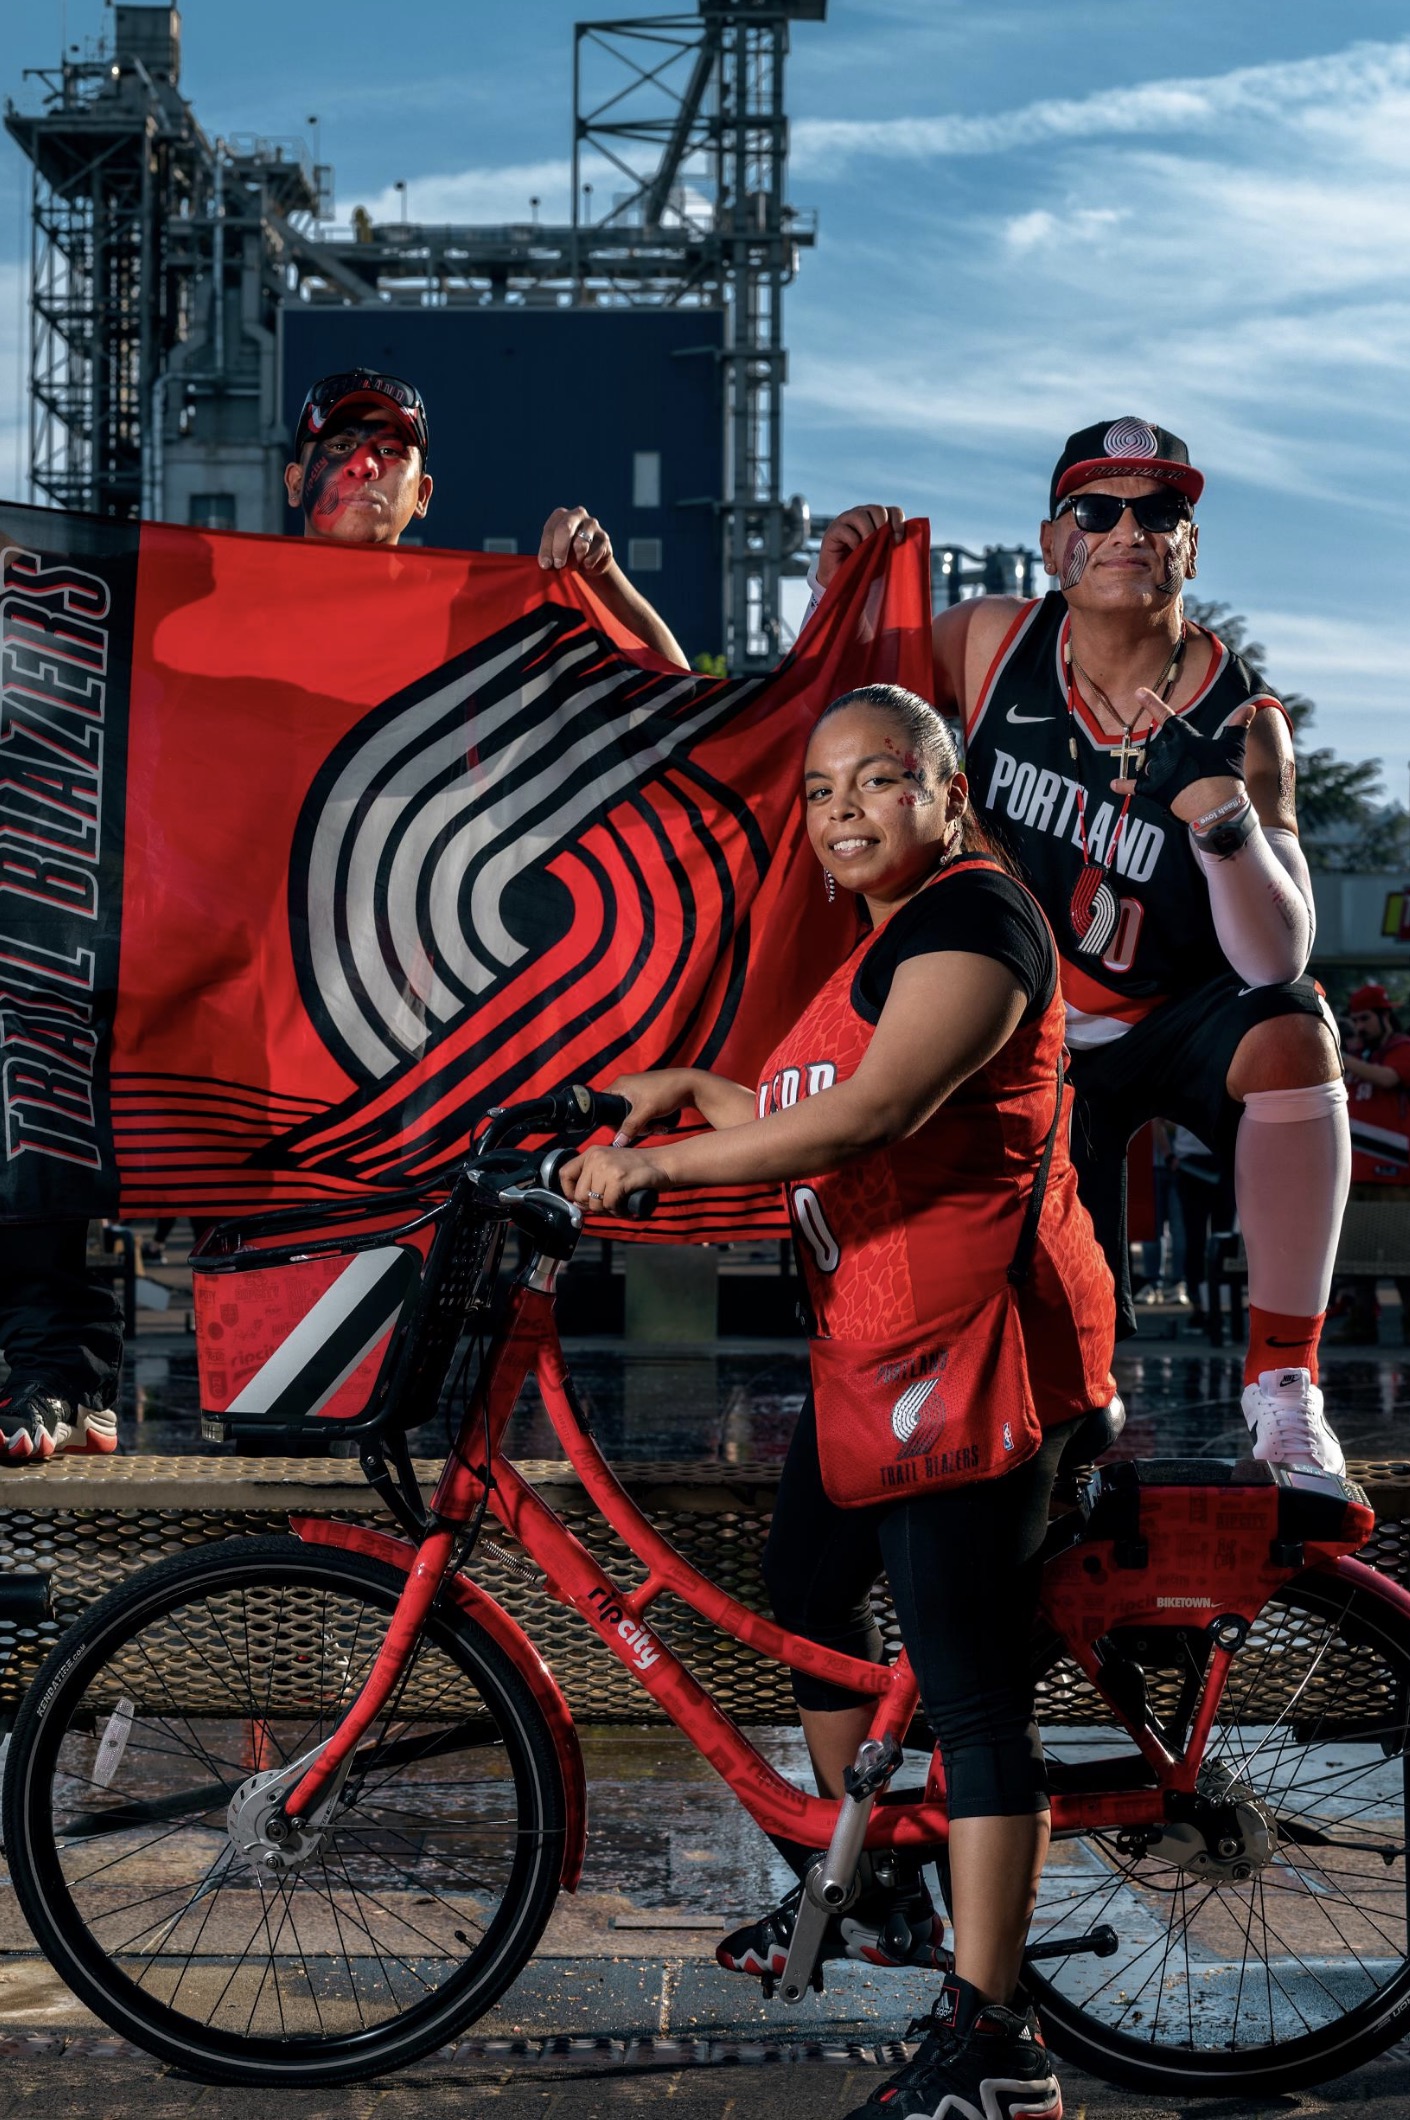 We love bikes and Blazers! Show your support on Rip City Ride day this Sunday ...1410 x 2120